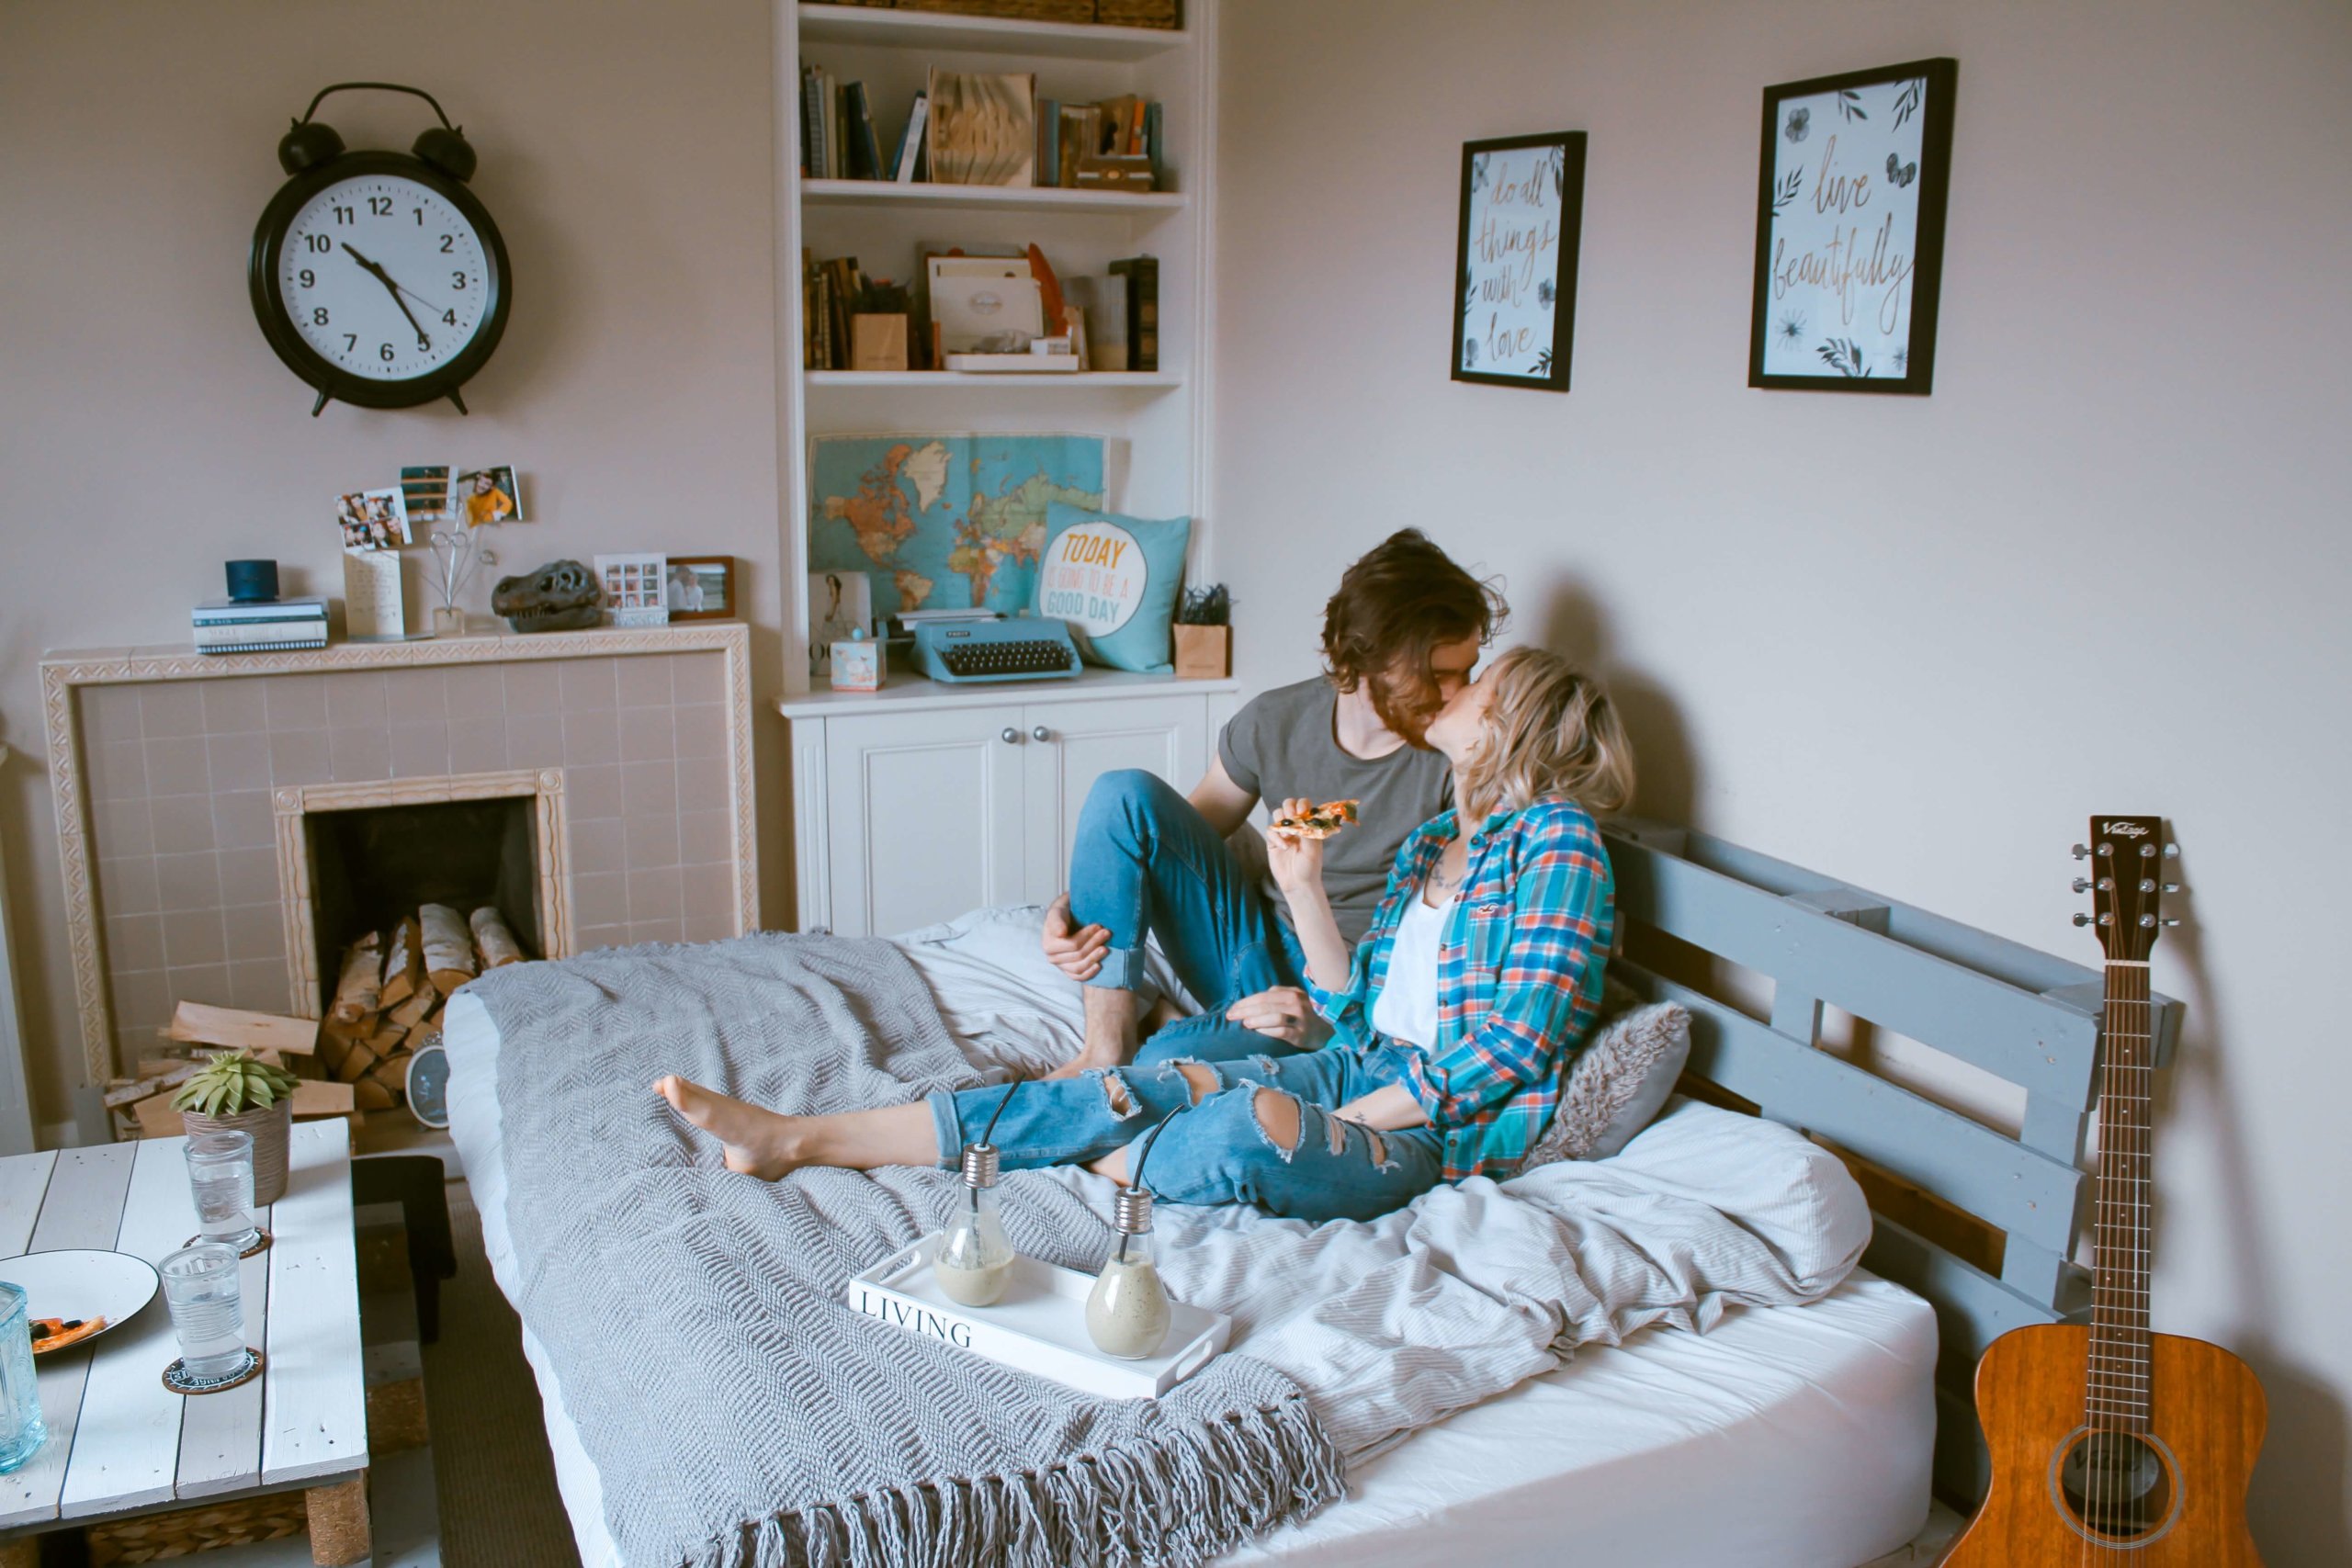 5 Lessons I Learned from Living with My Significant Other